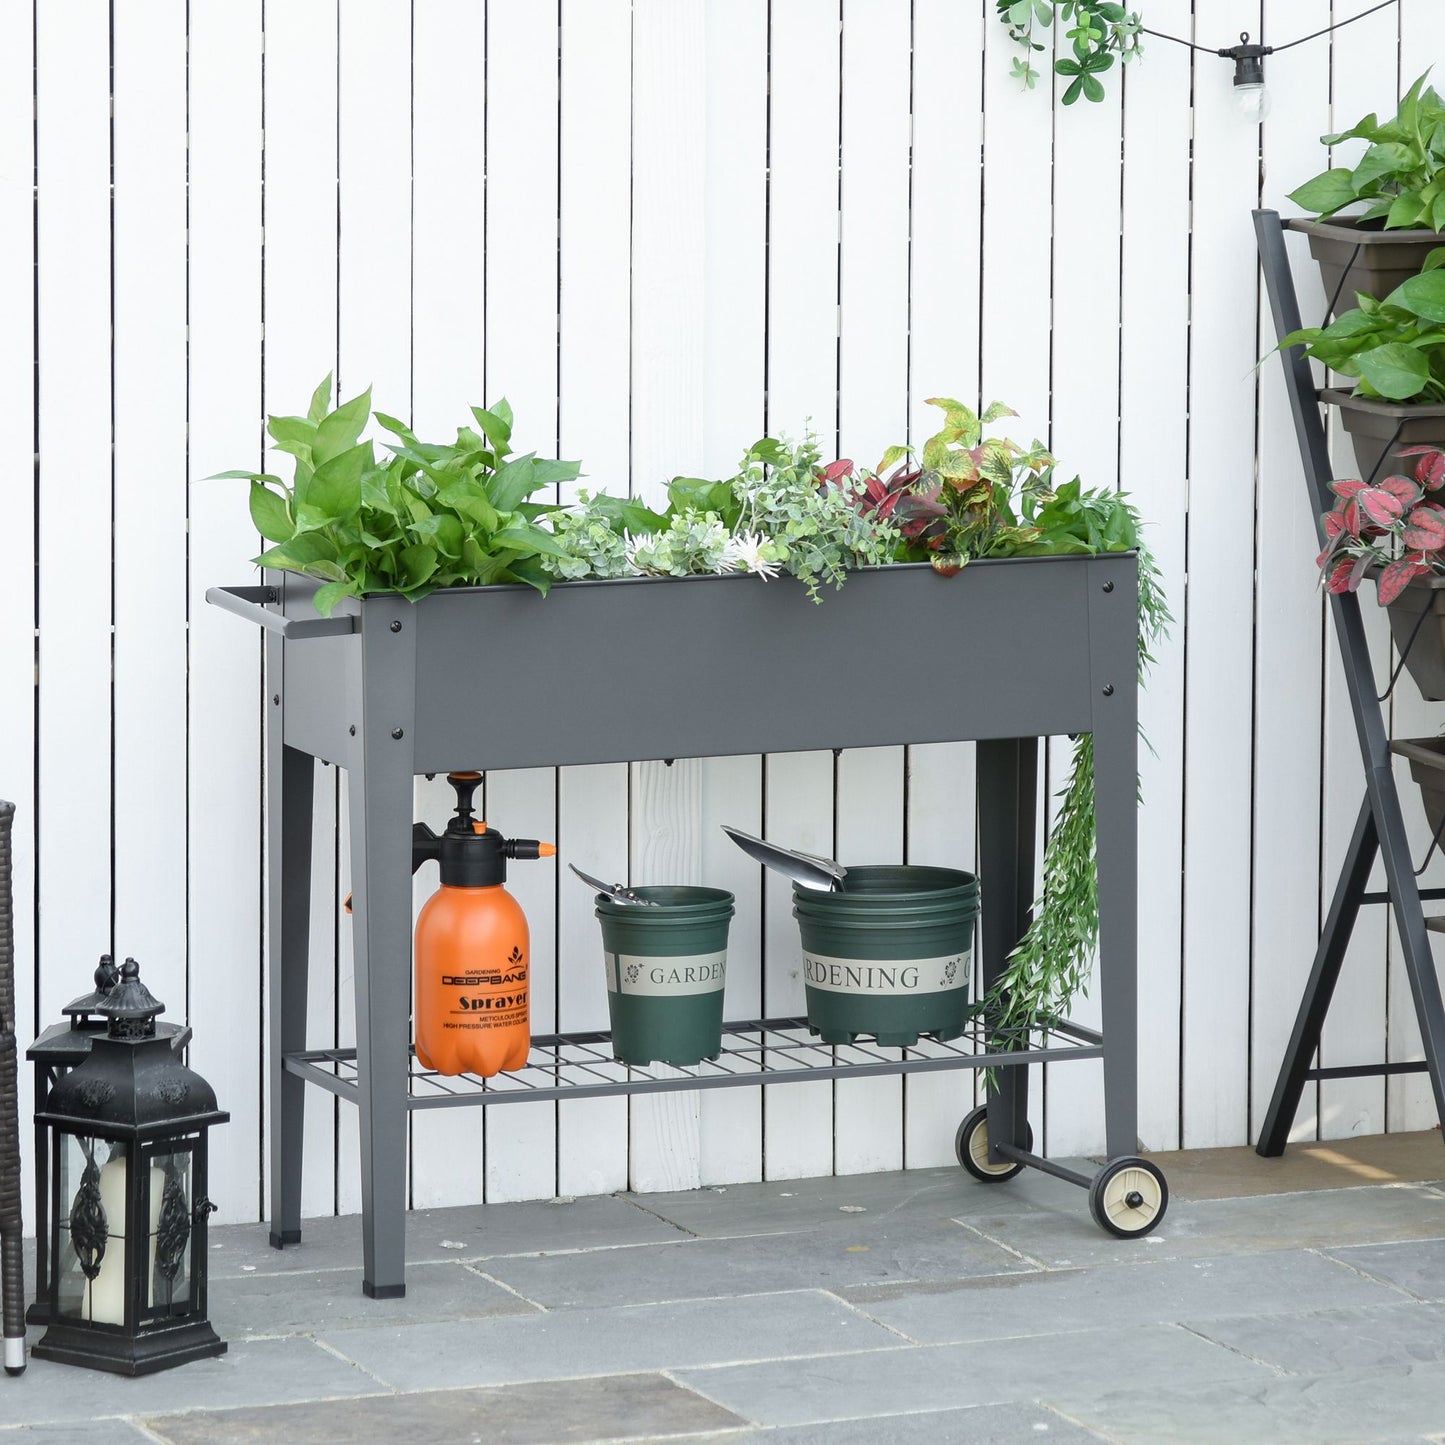 Outsunny Raised Garden Bed with Wheels and Bottom Shelf Outdoor 104 x 39 x 80cm